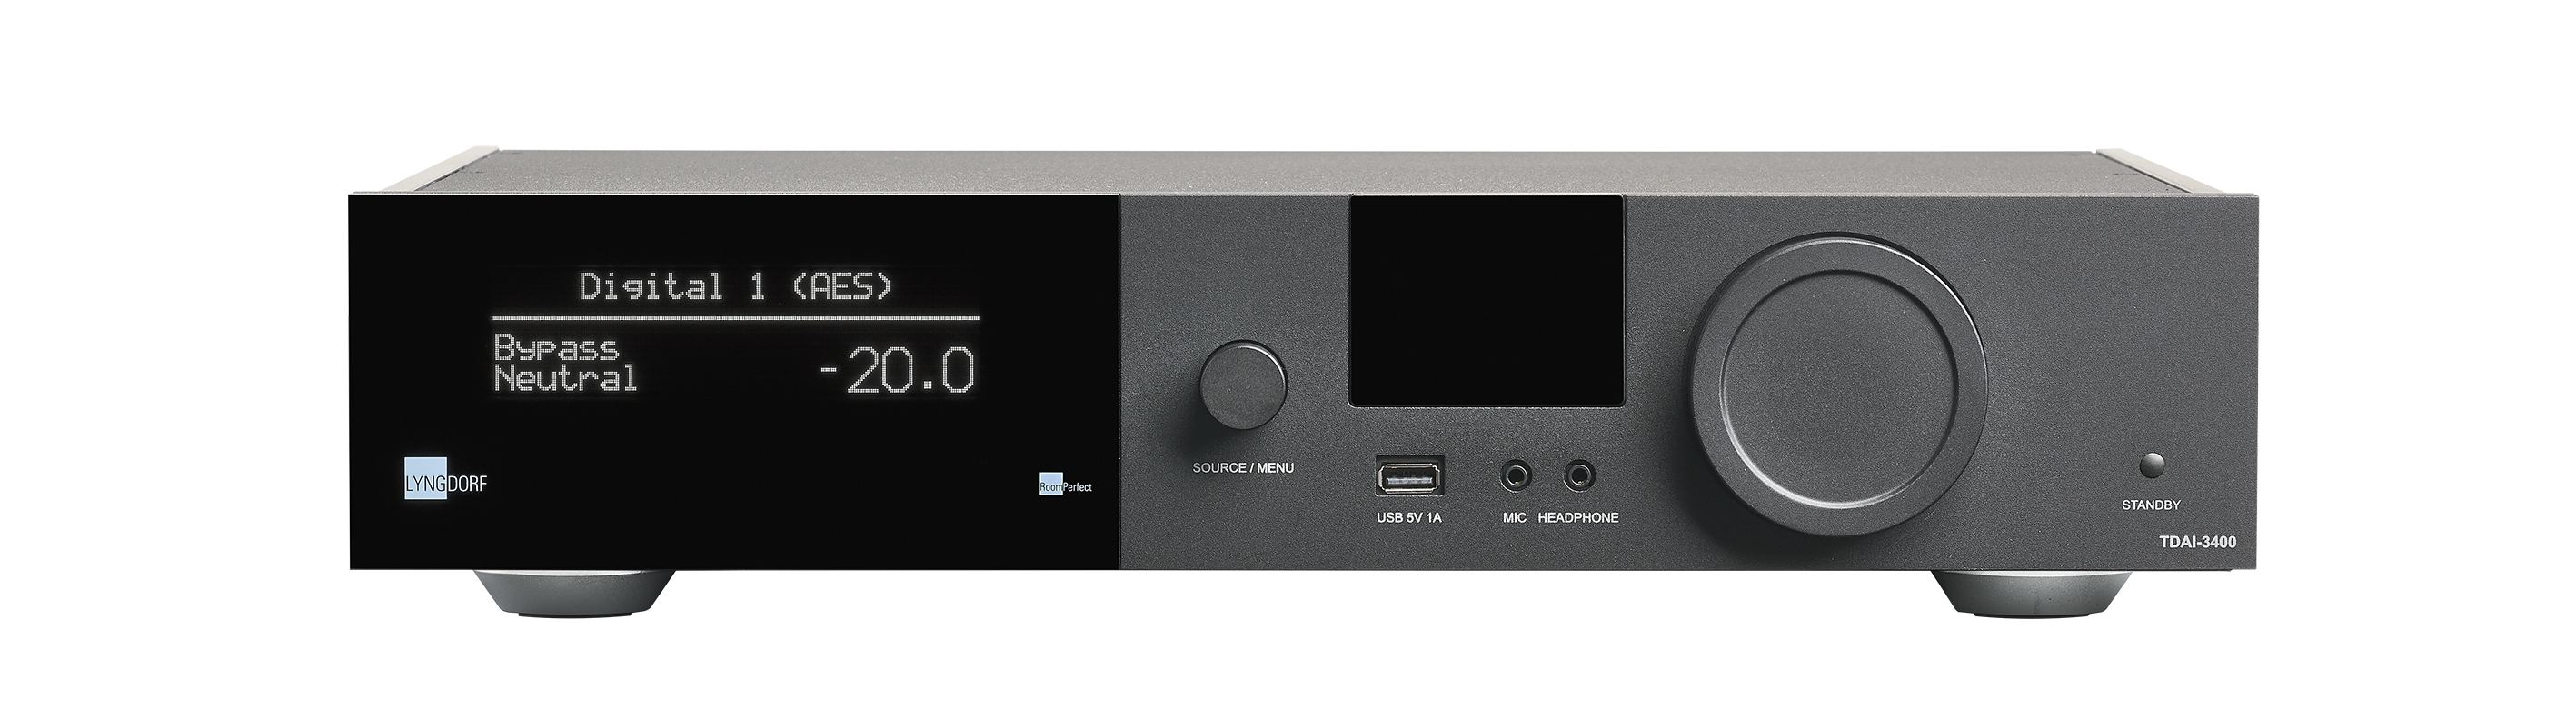 Lyngdorf TDAI-3400 Integrated Amplifier w/ Room Correction (available to demo)